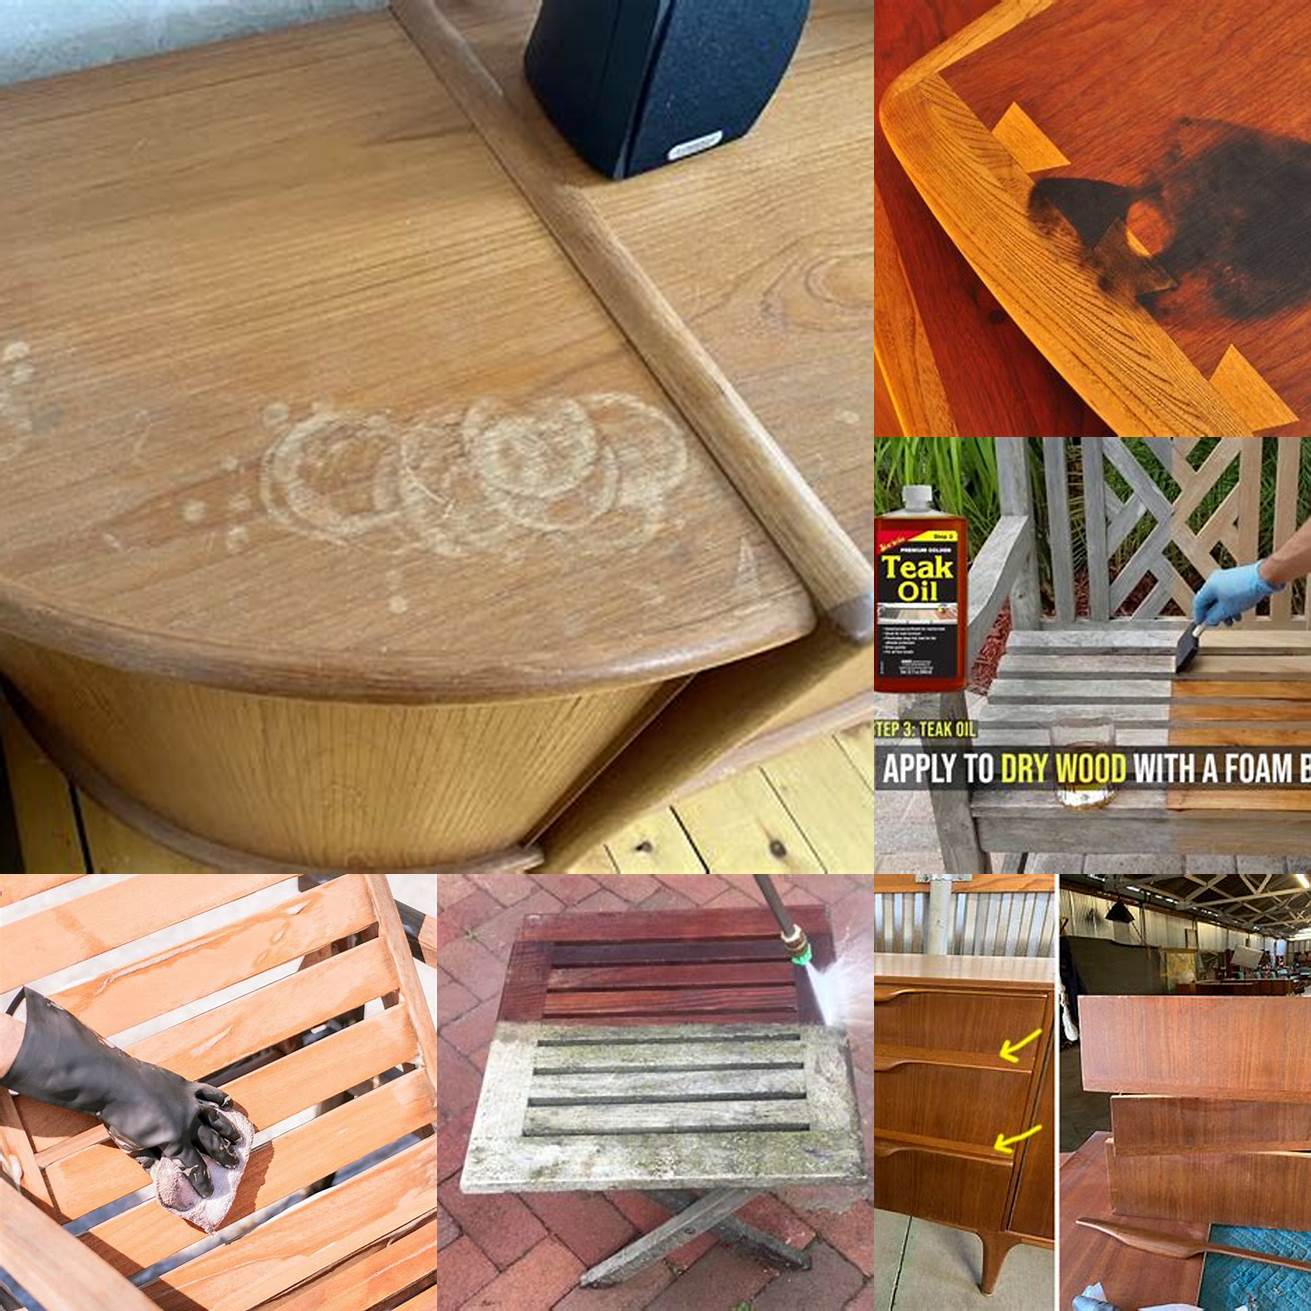 Picture of teak furniture being damaged by chlorine